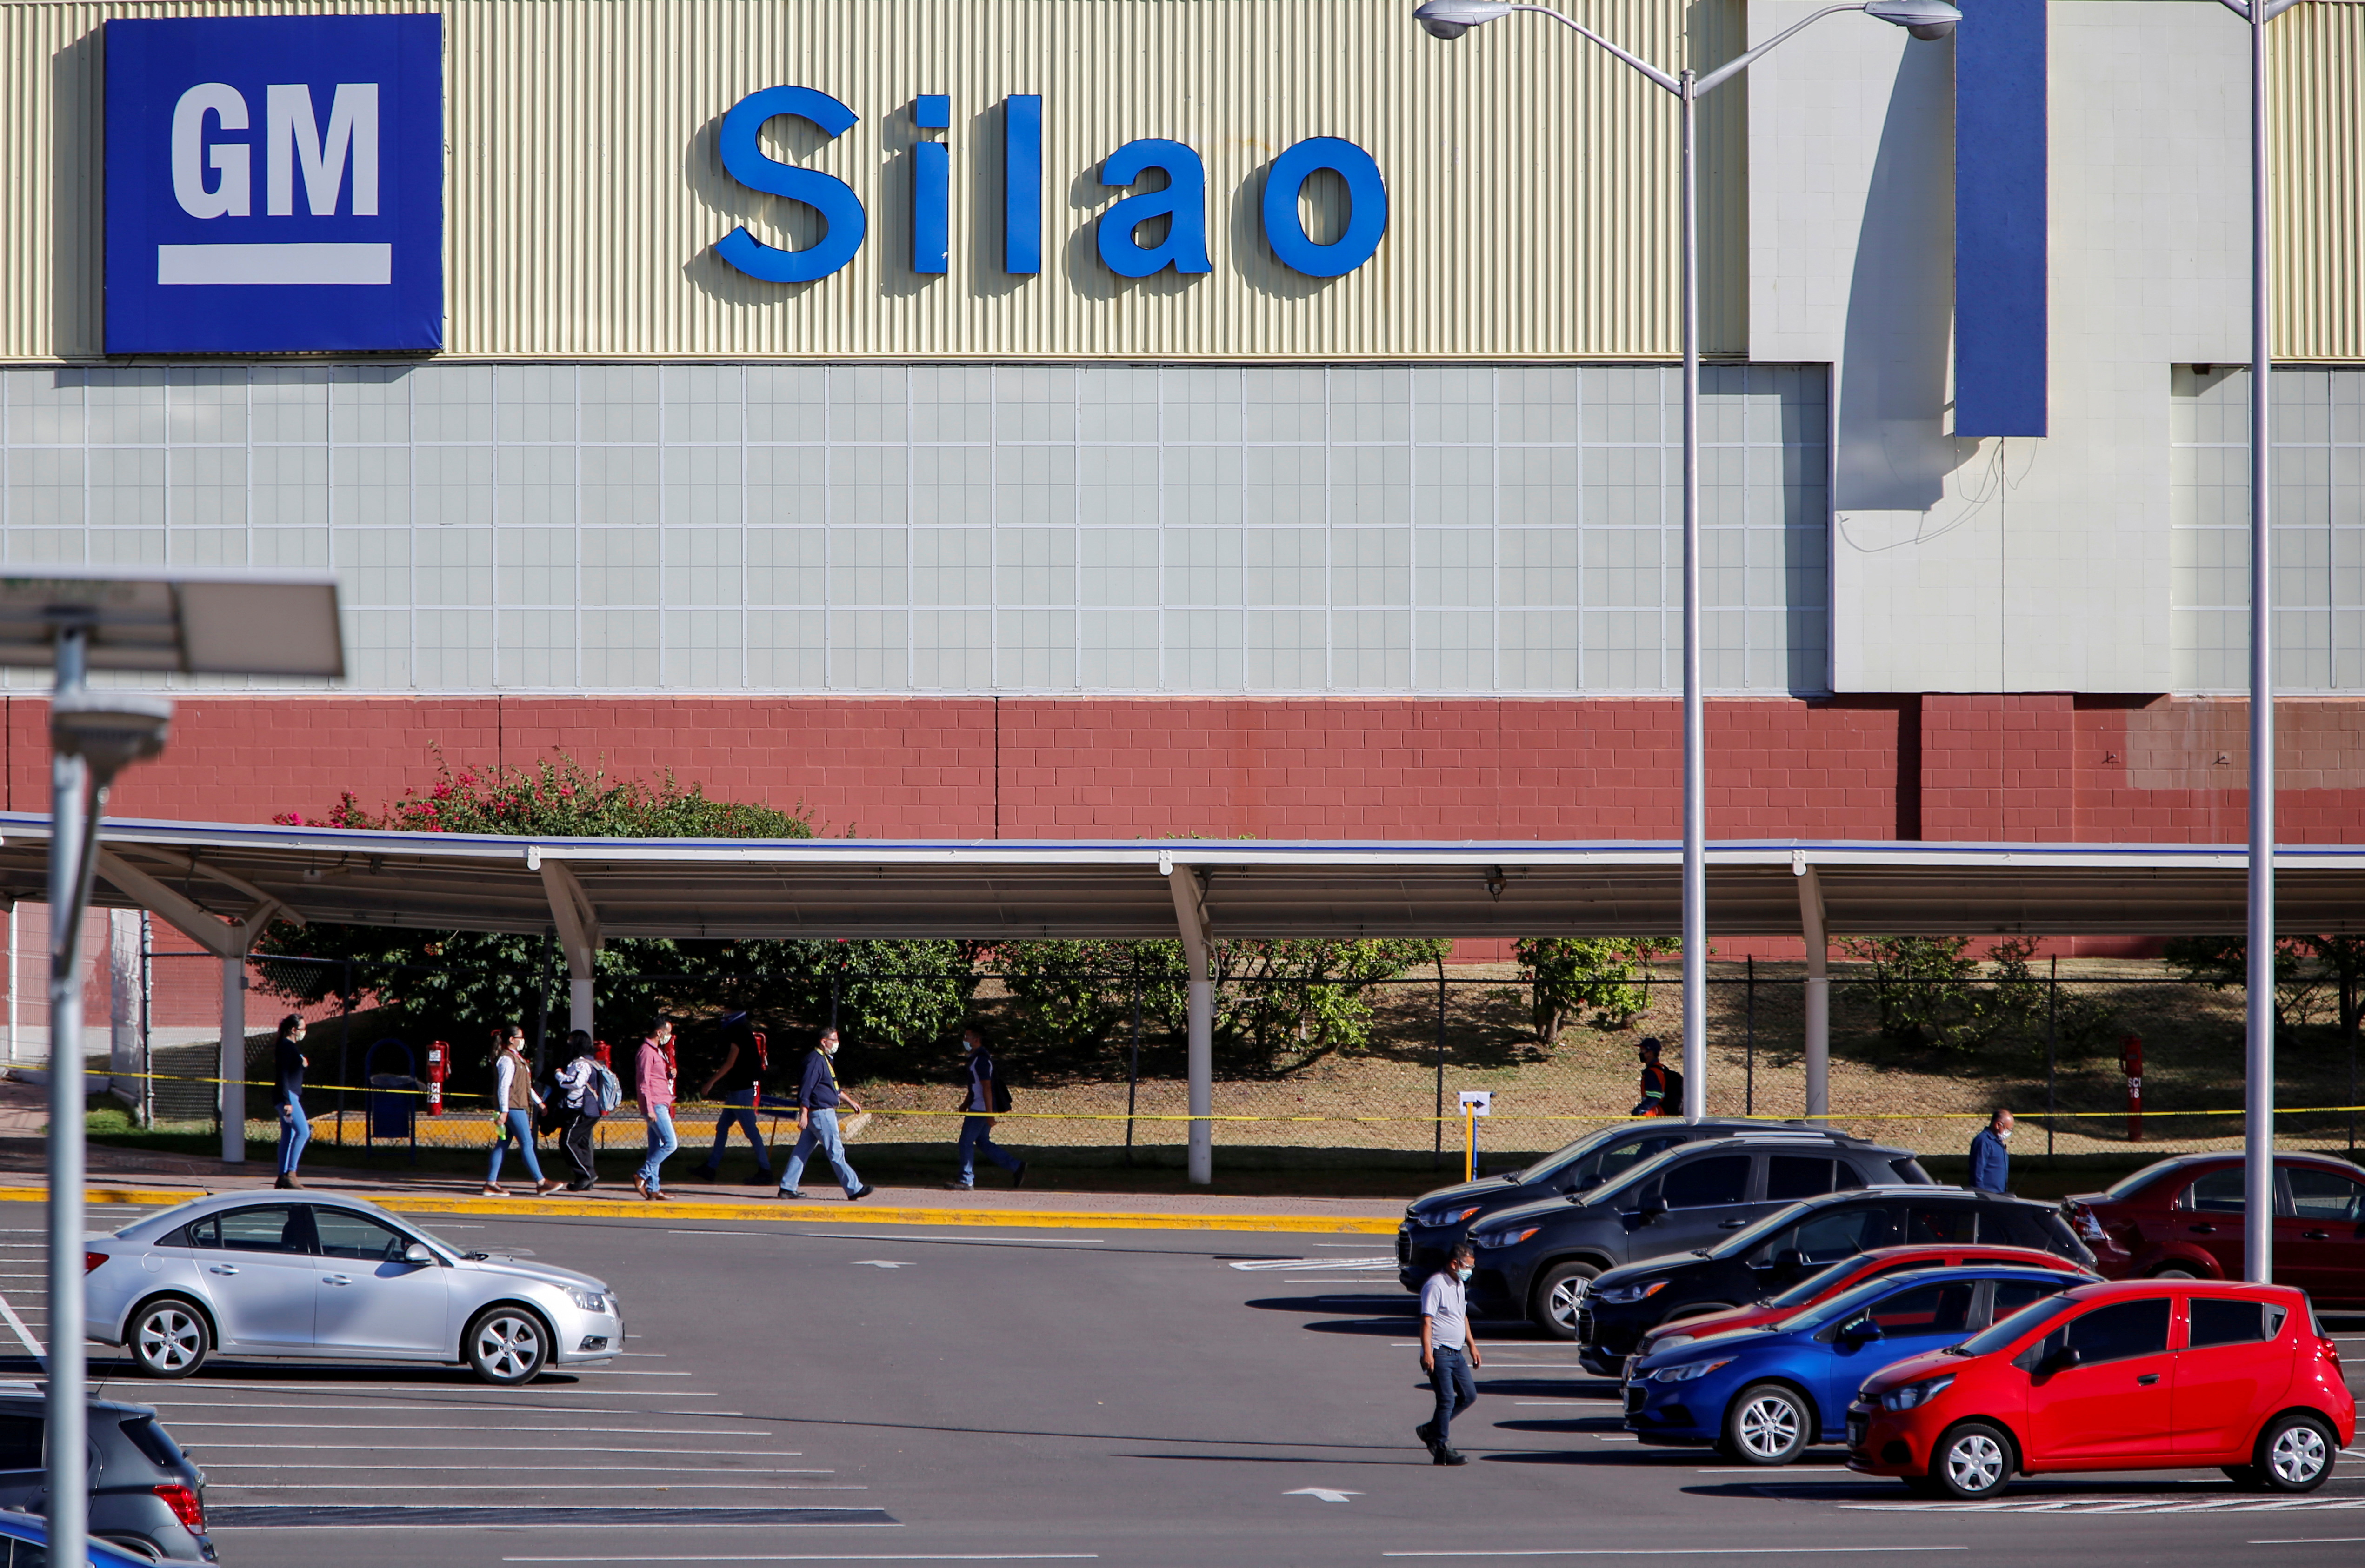 GM's truck assembly plant in Silao, Mexico